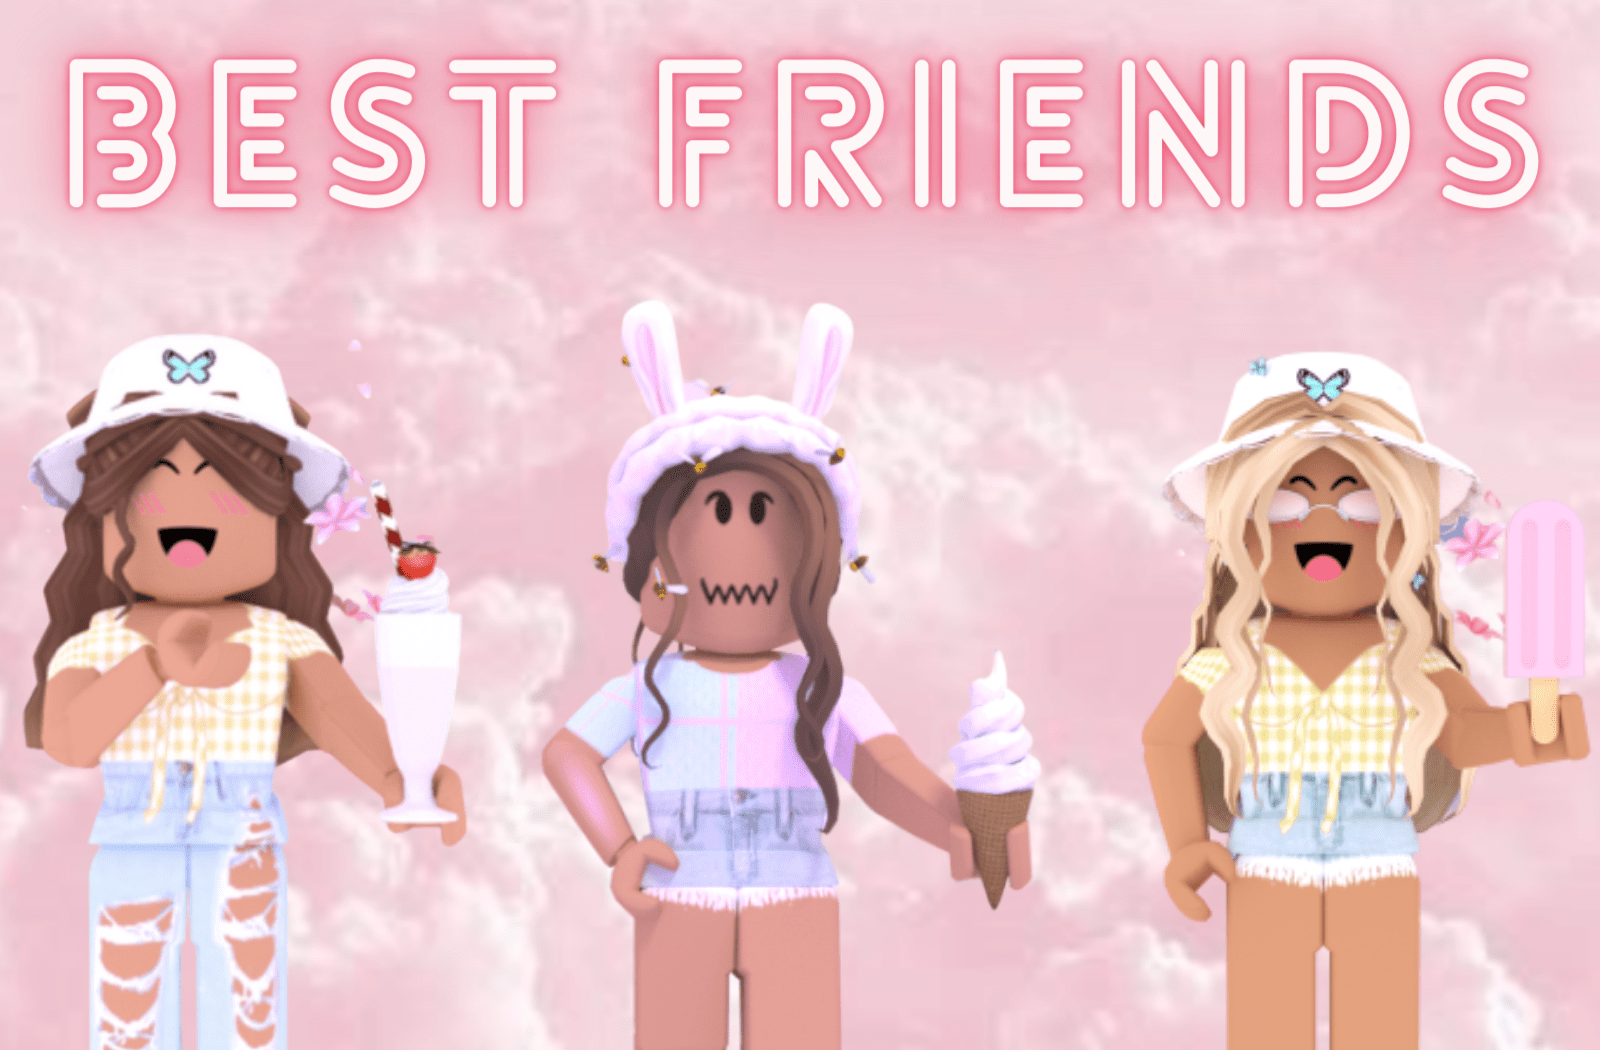 Aesthetic gfx  Roblox pictures, Roblox animation, Cute tumblr wallpaper